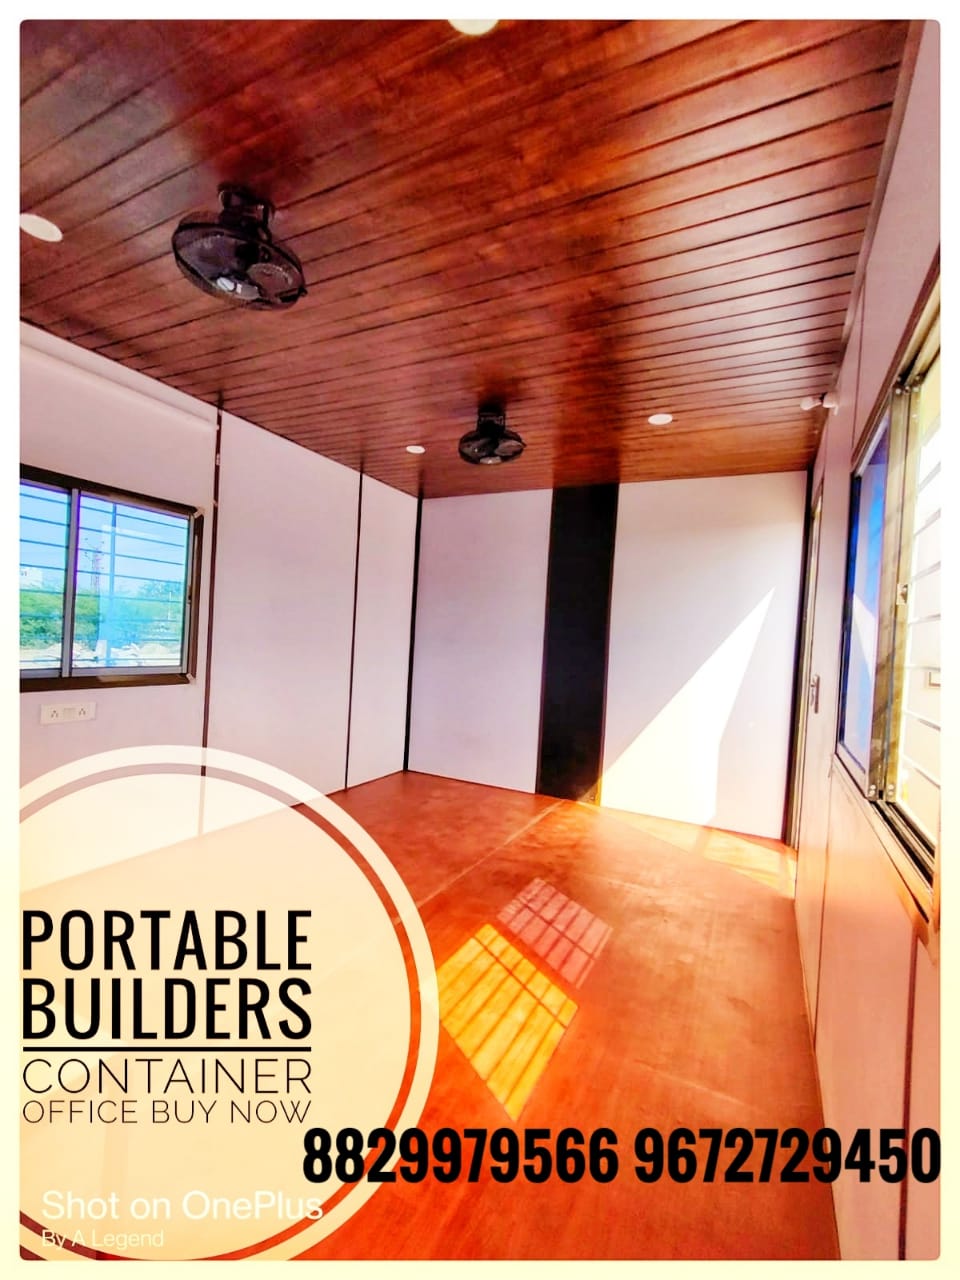 10x20 container office interior photo portable builders